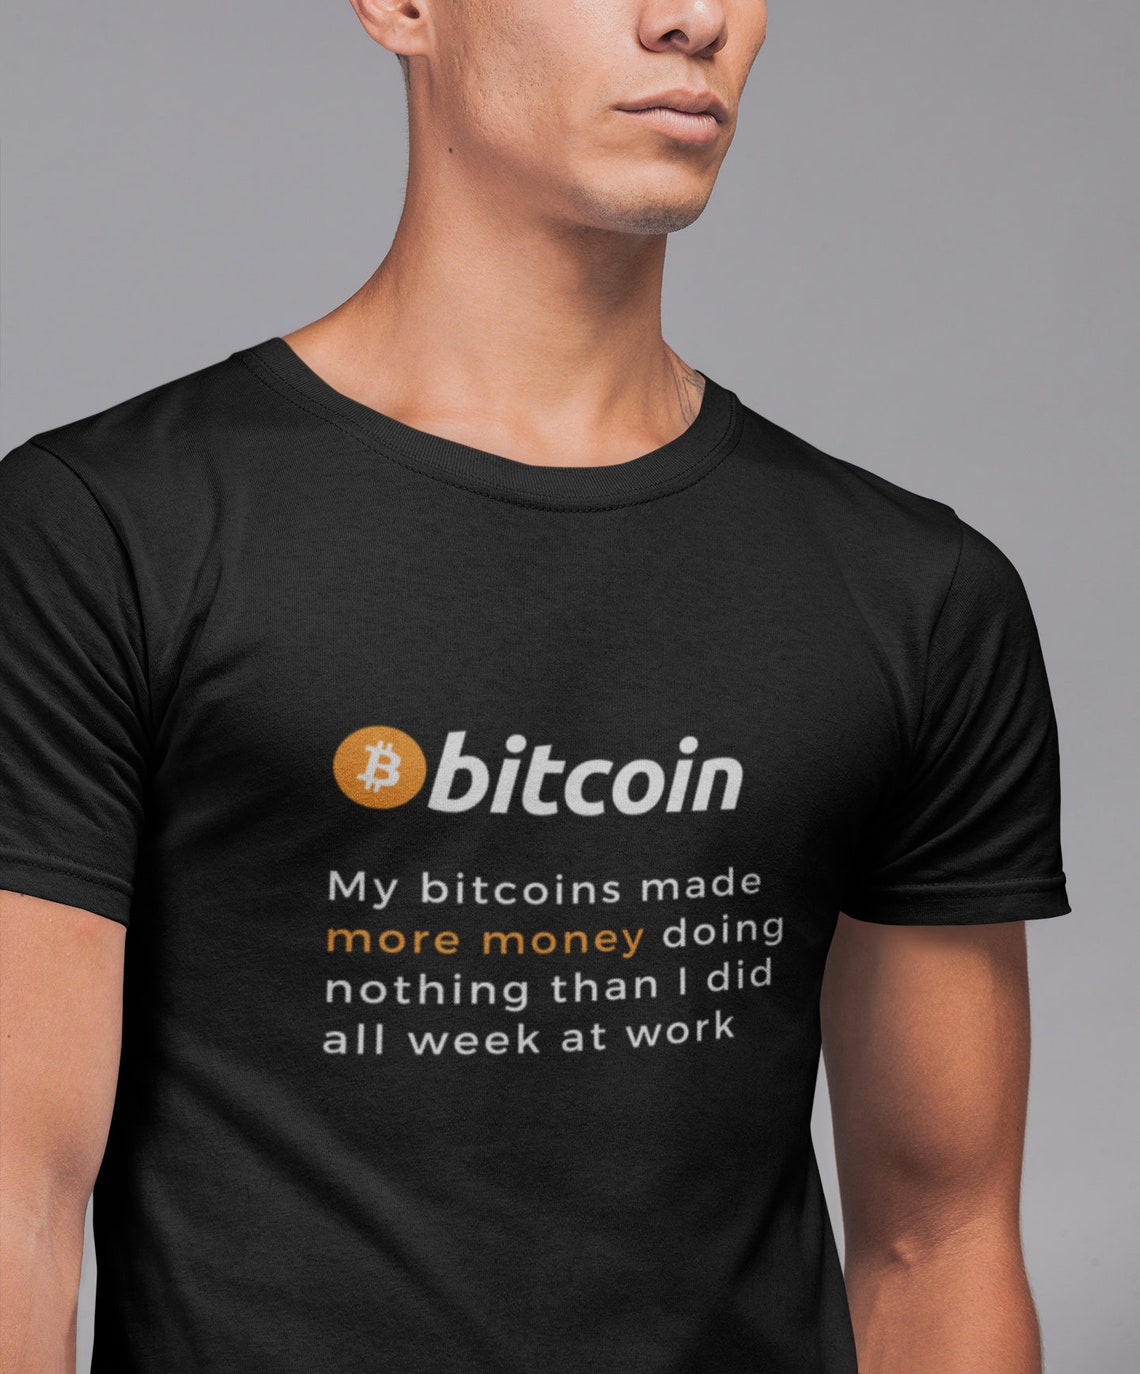 Buy bitcoin t shirt how do i withdraw bitcoins from coinbase